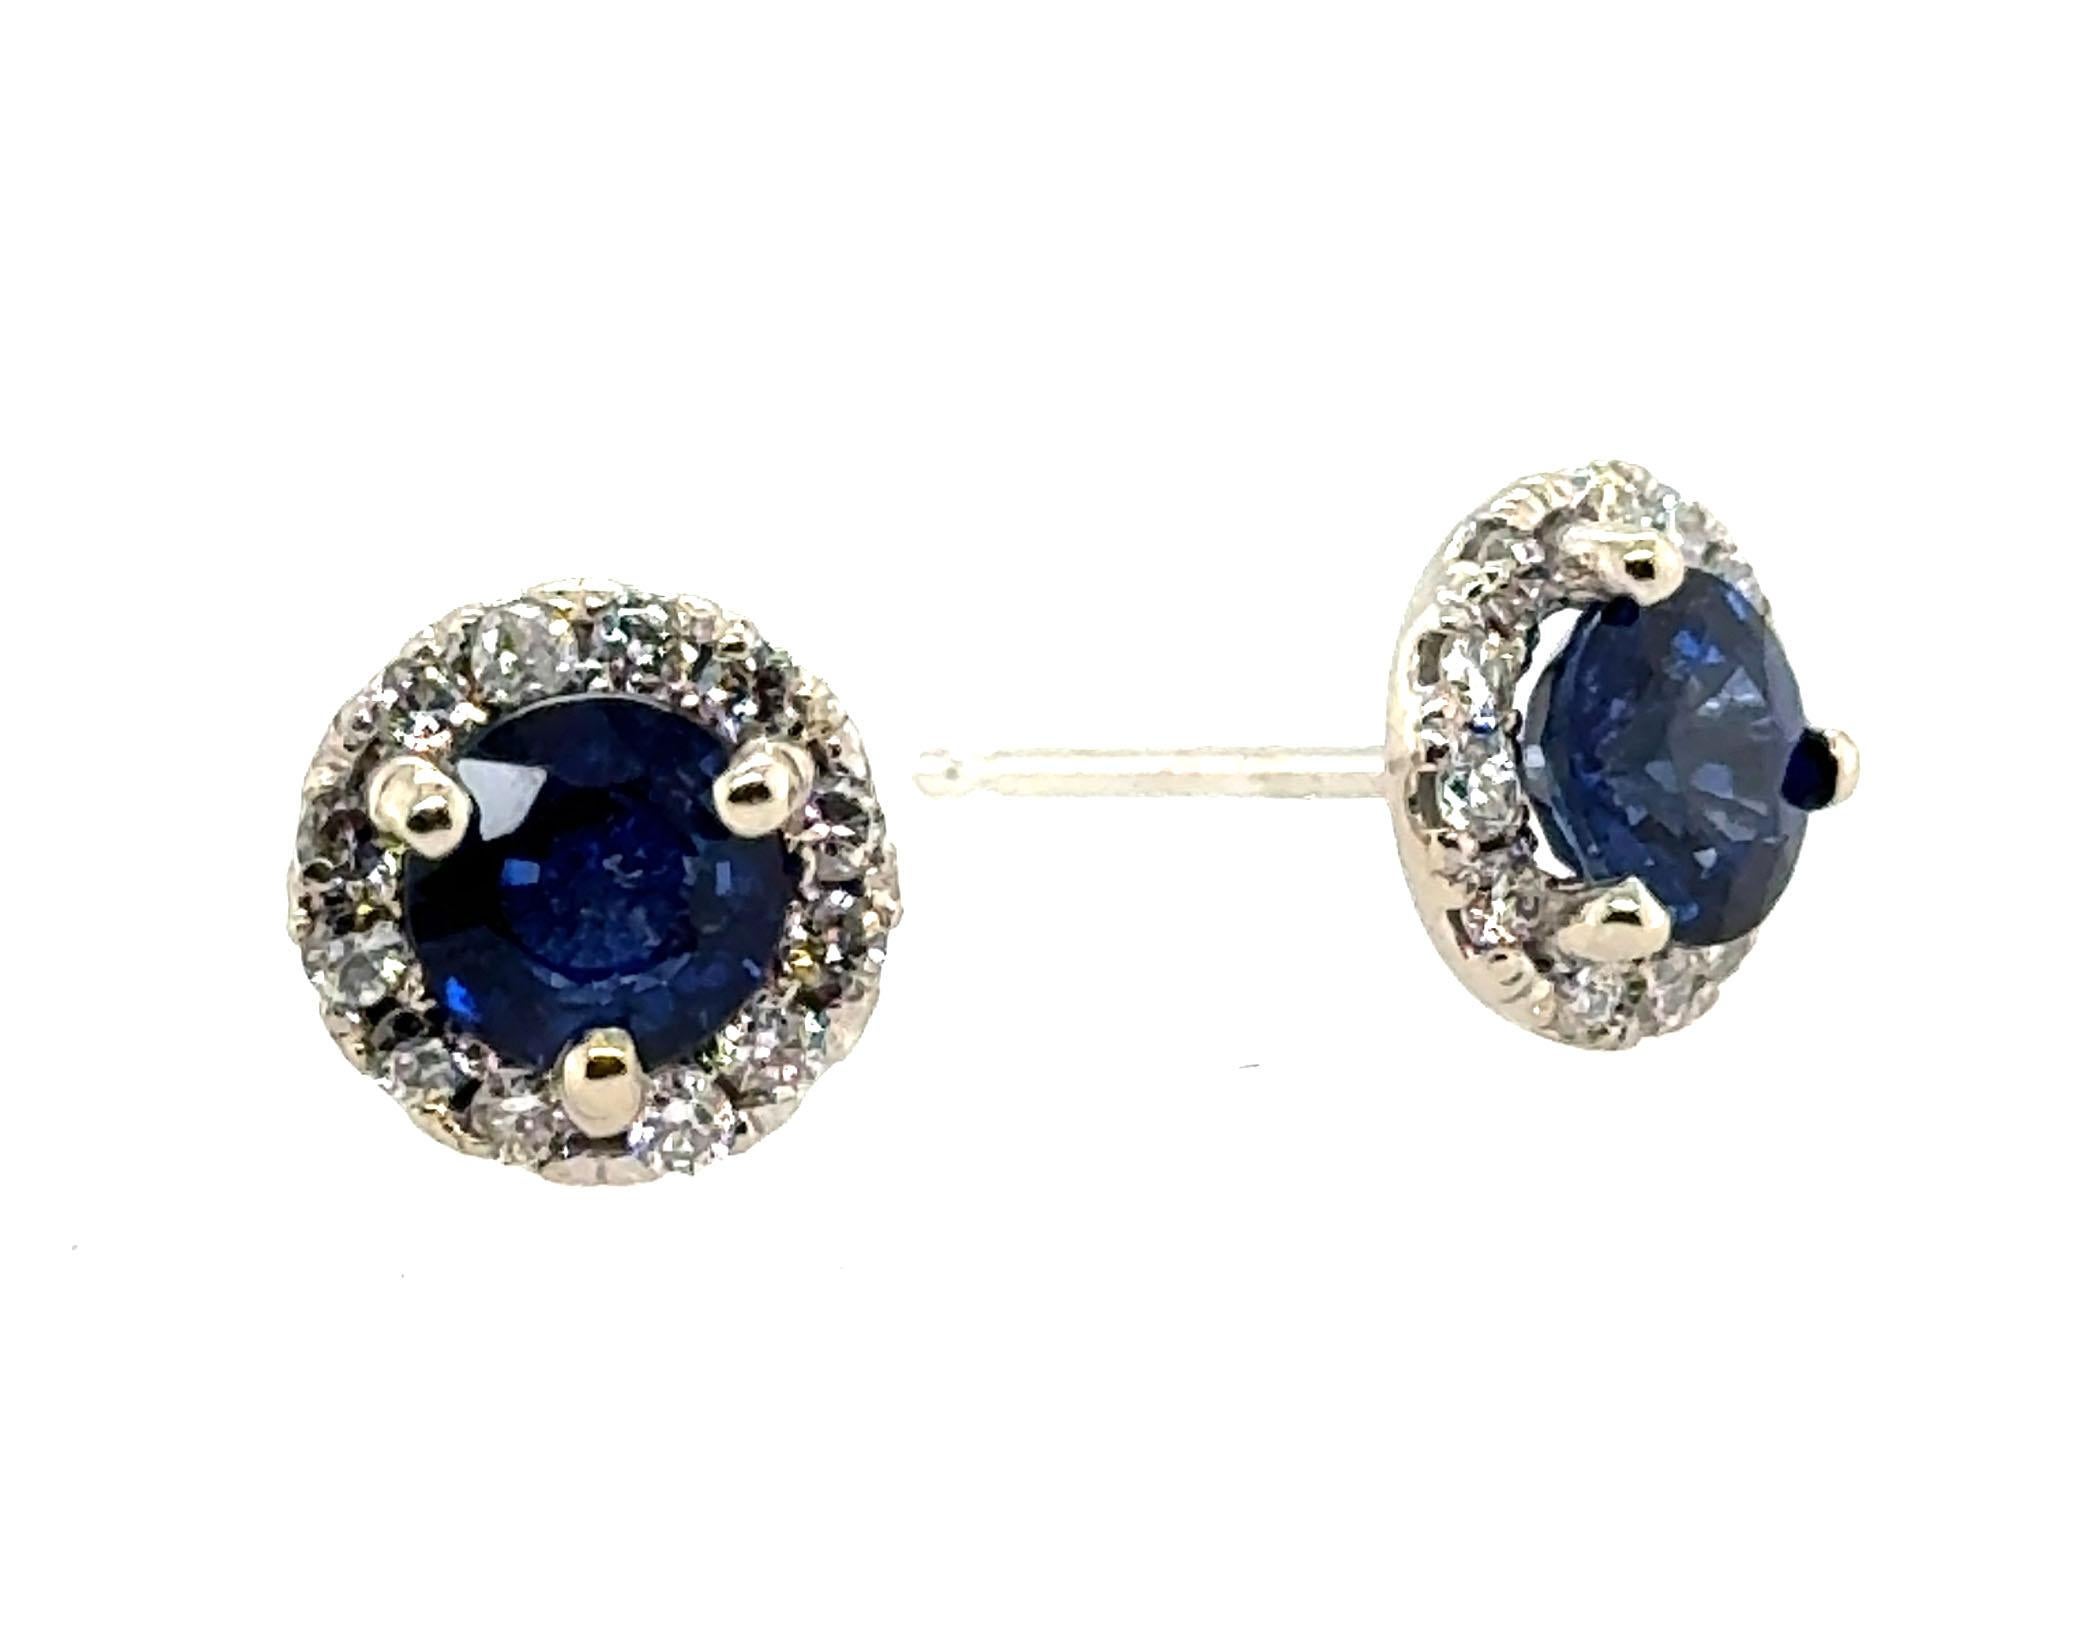 Brand New Sapphire Diamond Stud Halo Earrings 1.50ct 14K White Gold


Featuring 2 Natural Mined Round Cut Sapphire Gemstones

Highest Quality Everything

100% Natural Sapphires & Mined Diamonds

1.50 Carat Gemstone & Diamond Weight

Solid 14K White